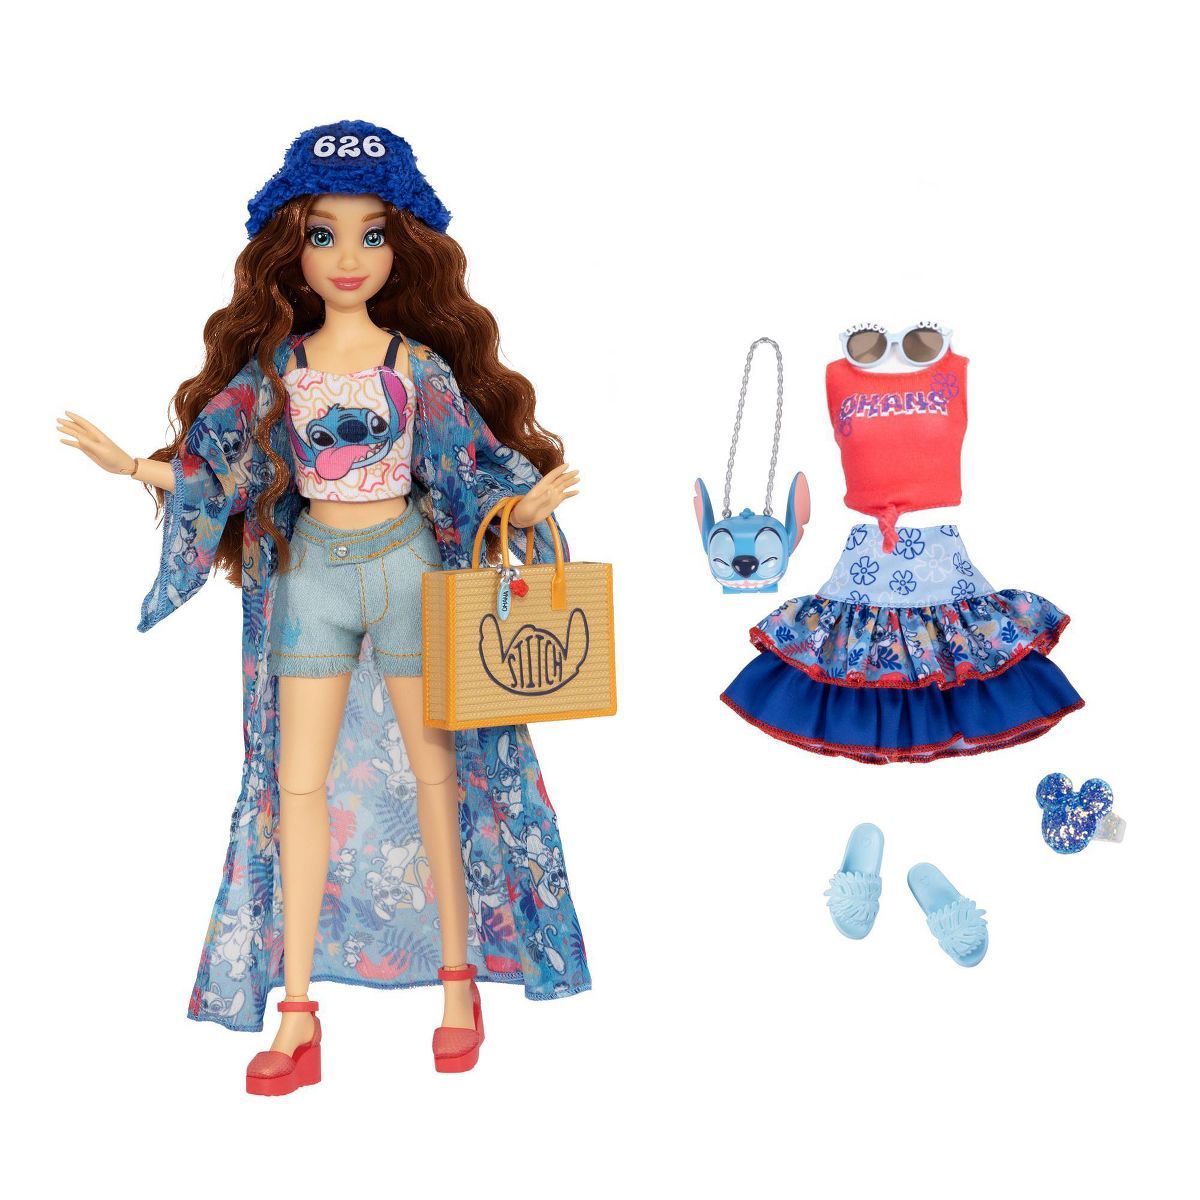 Disney ILY 4ever Inspired by Stitch Fashion Doll | Target